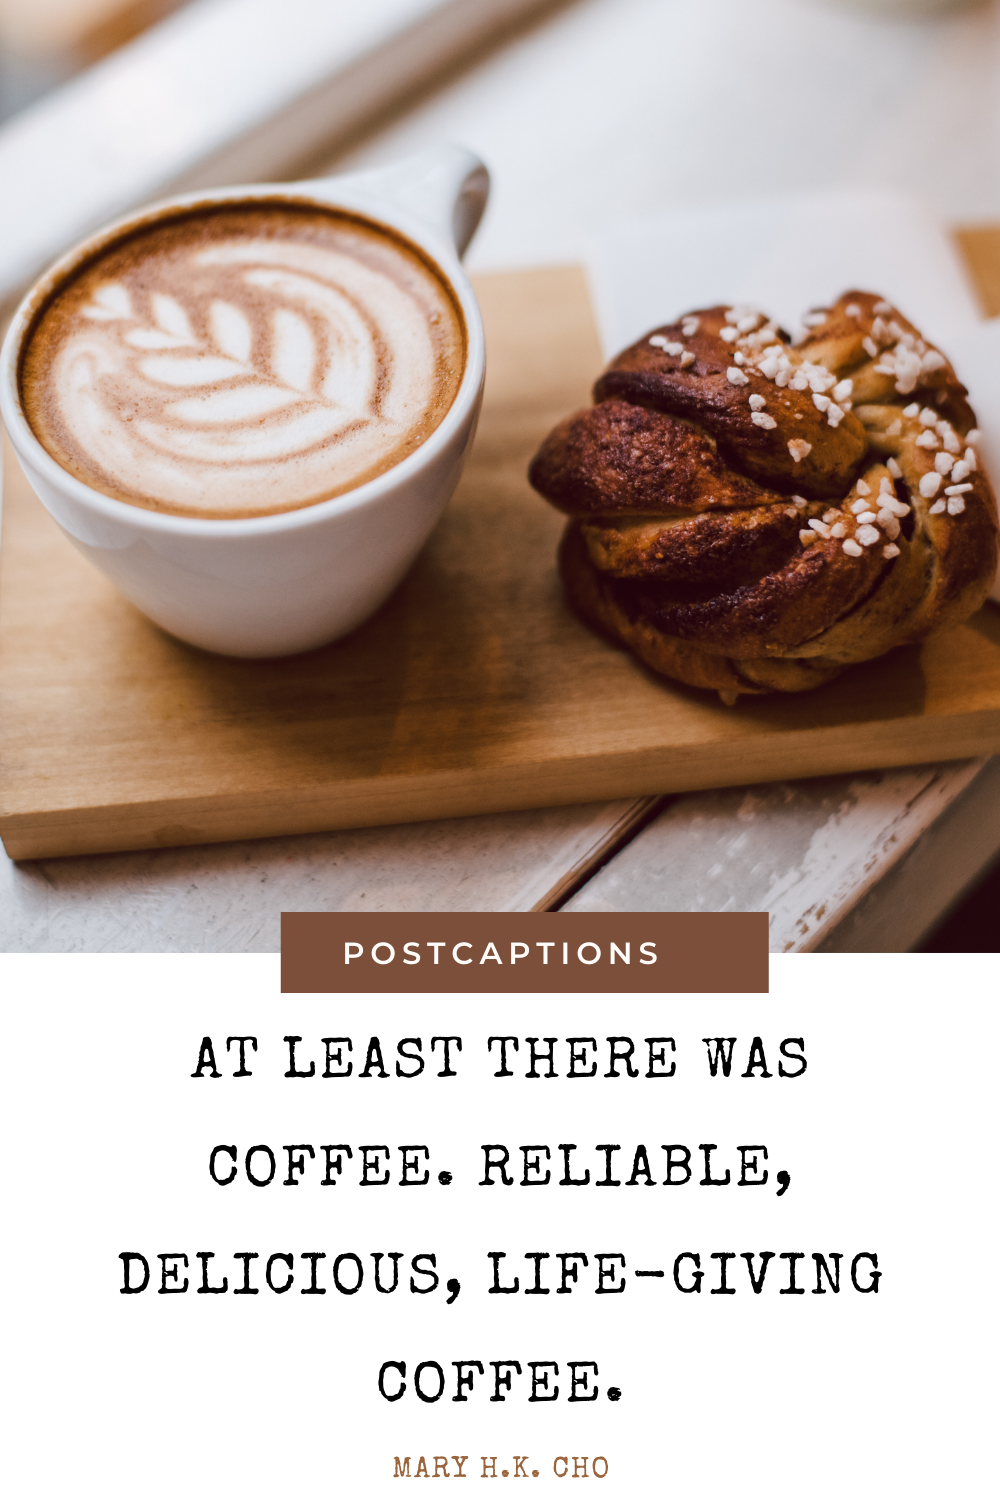 Coffee quotes for Instagram